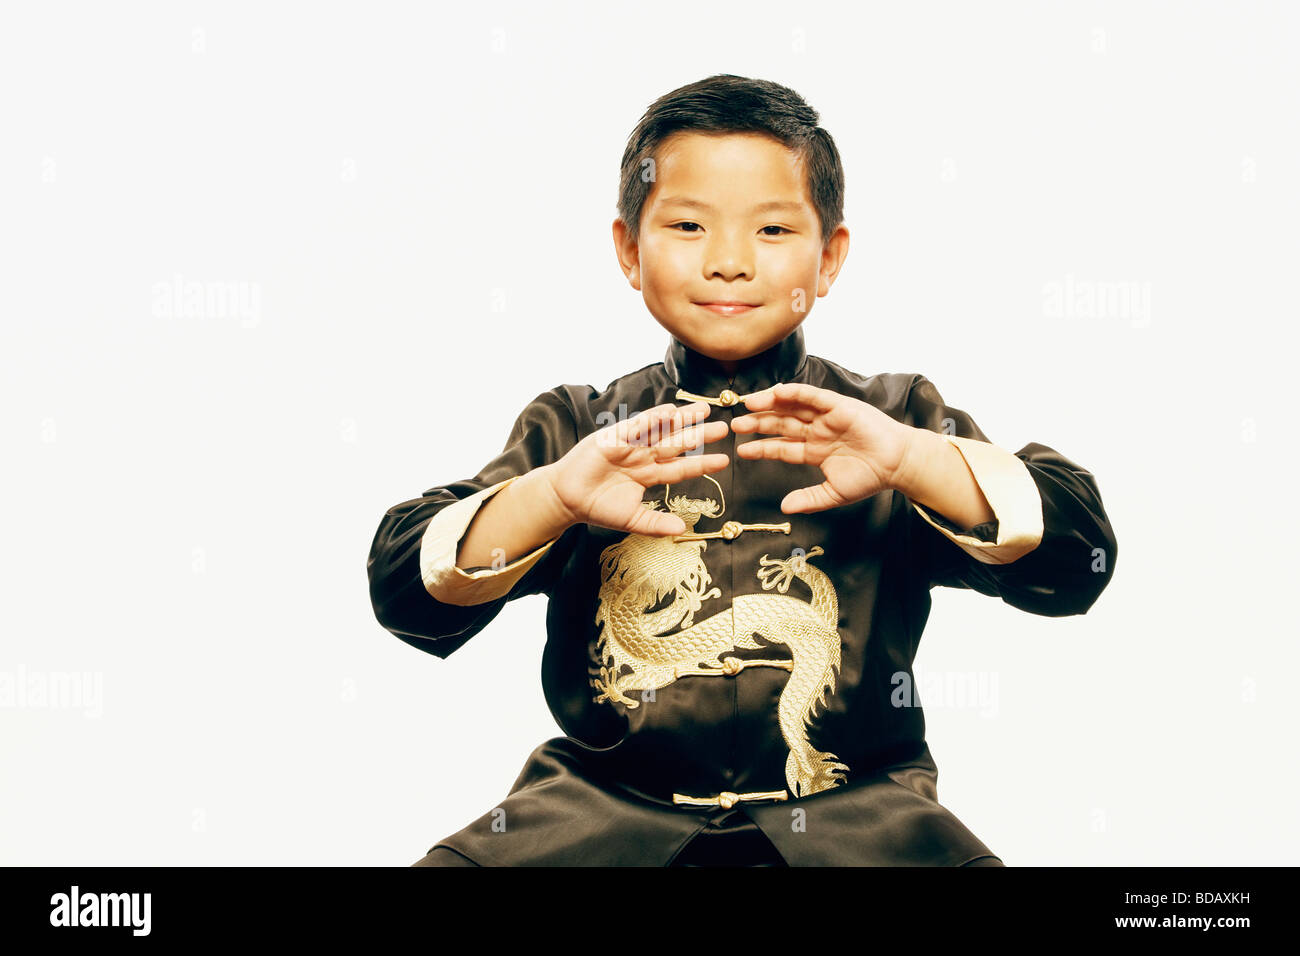 Portrait of a boy practicing martial arts Stock Photo